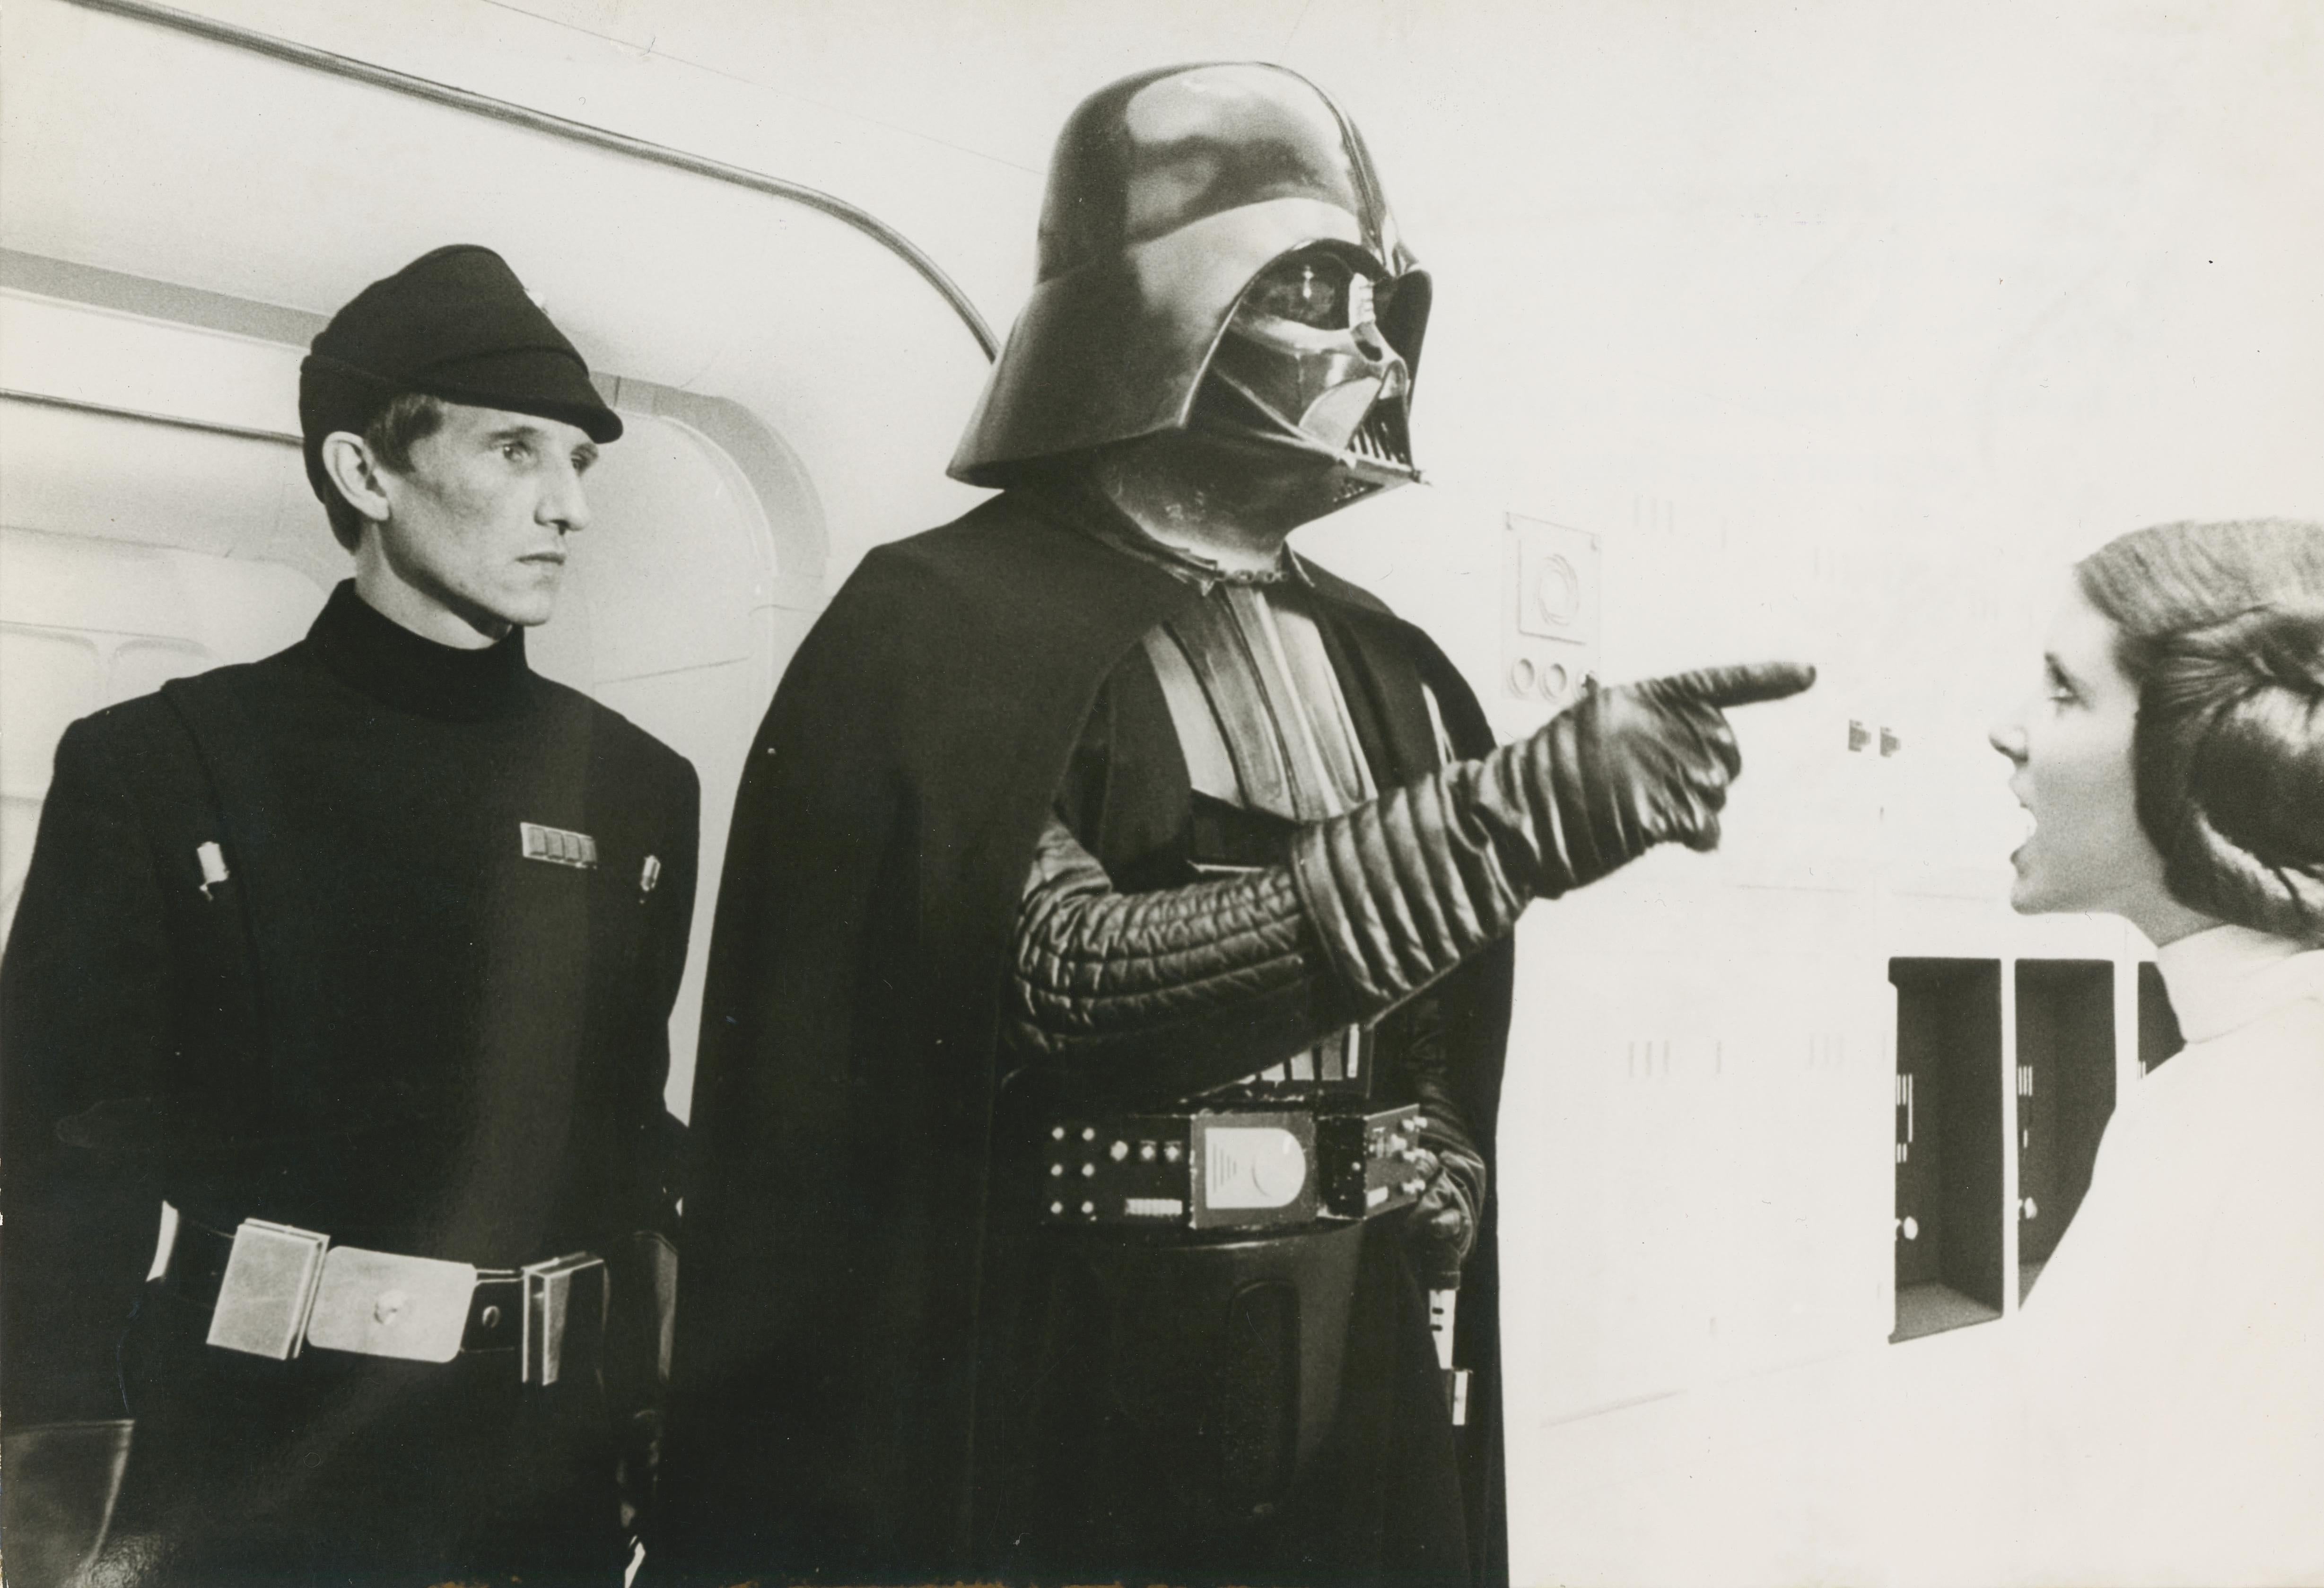 Unknown Portrait Photograph - Star Wars, Darth Vader and Leia, Sience Fiction Filmstill, 1977